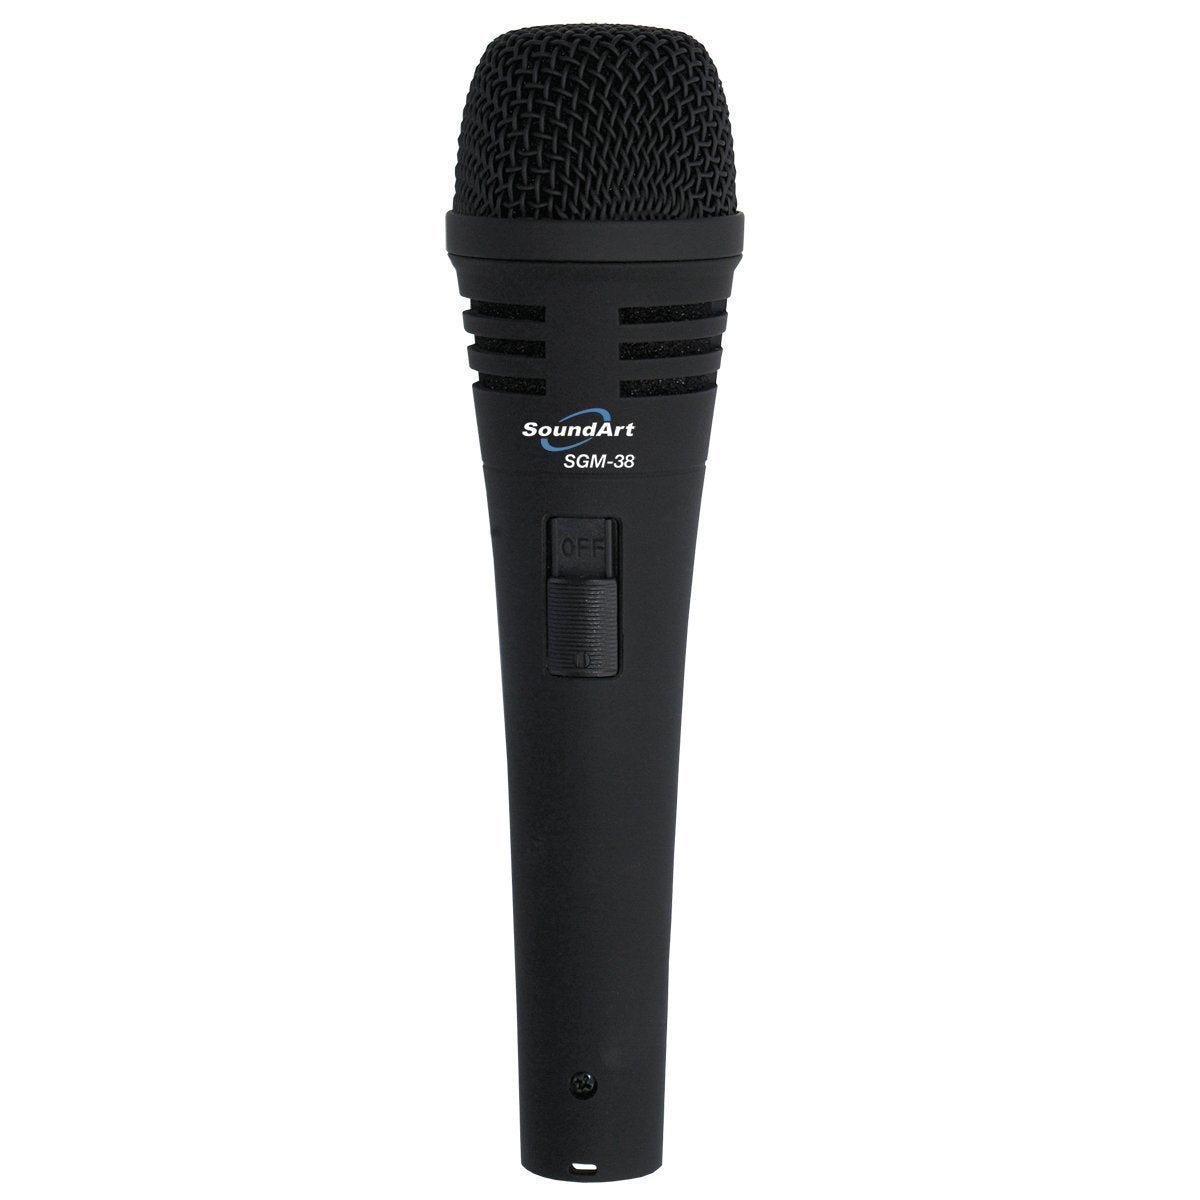 Load image into Gallery viewer, SoundArt SGM-38 Hand-Held Dynamic Microphone with Protective Bag
